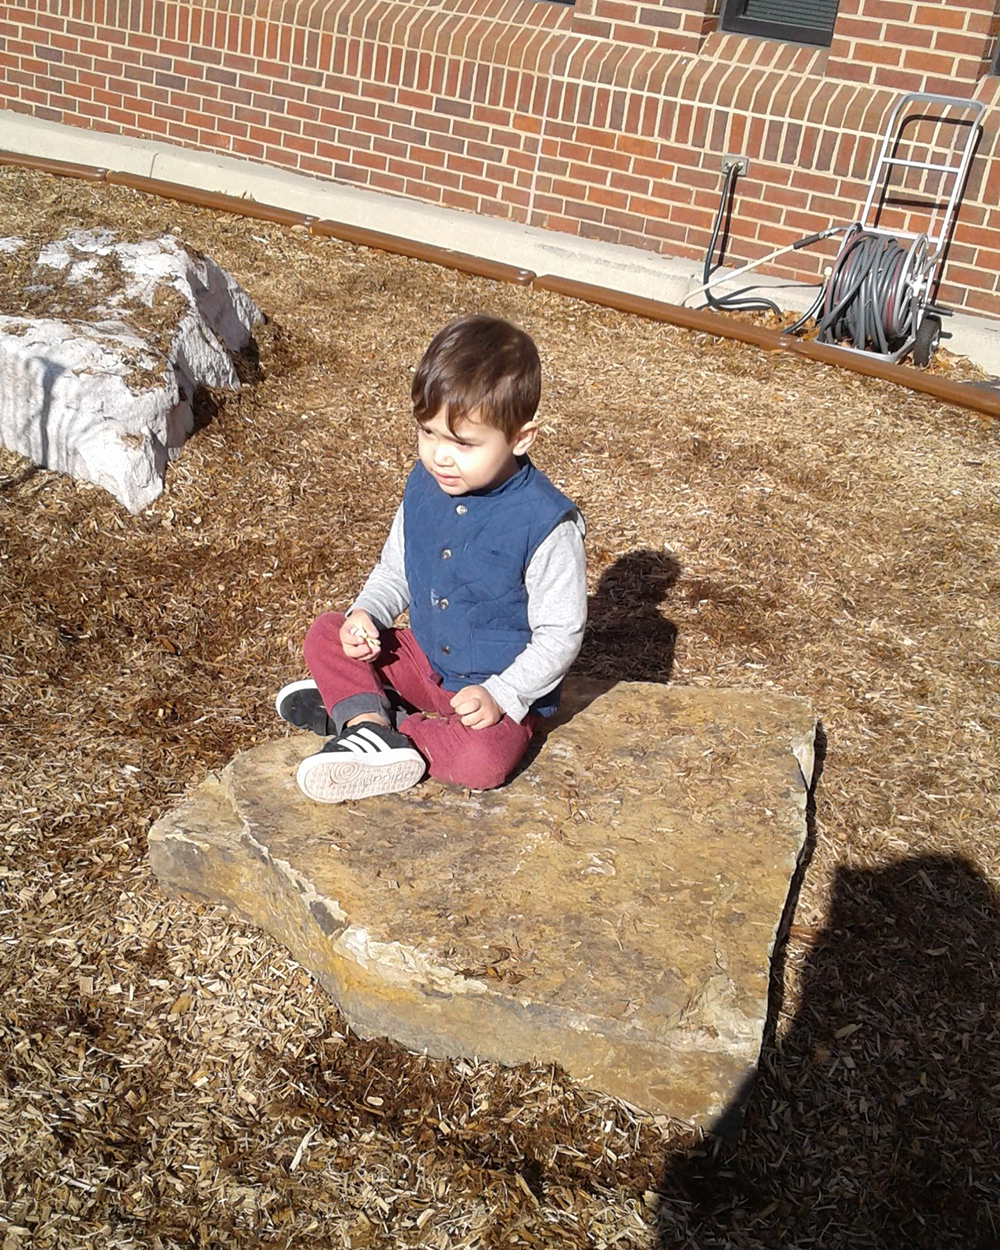 Enjoying the warm rock on a cool autumn day!